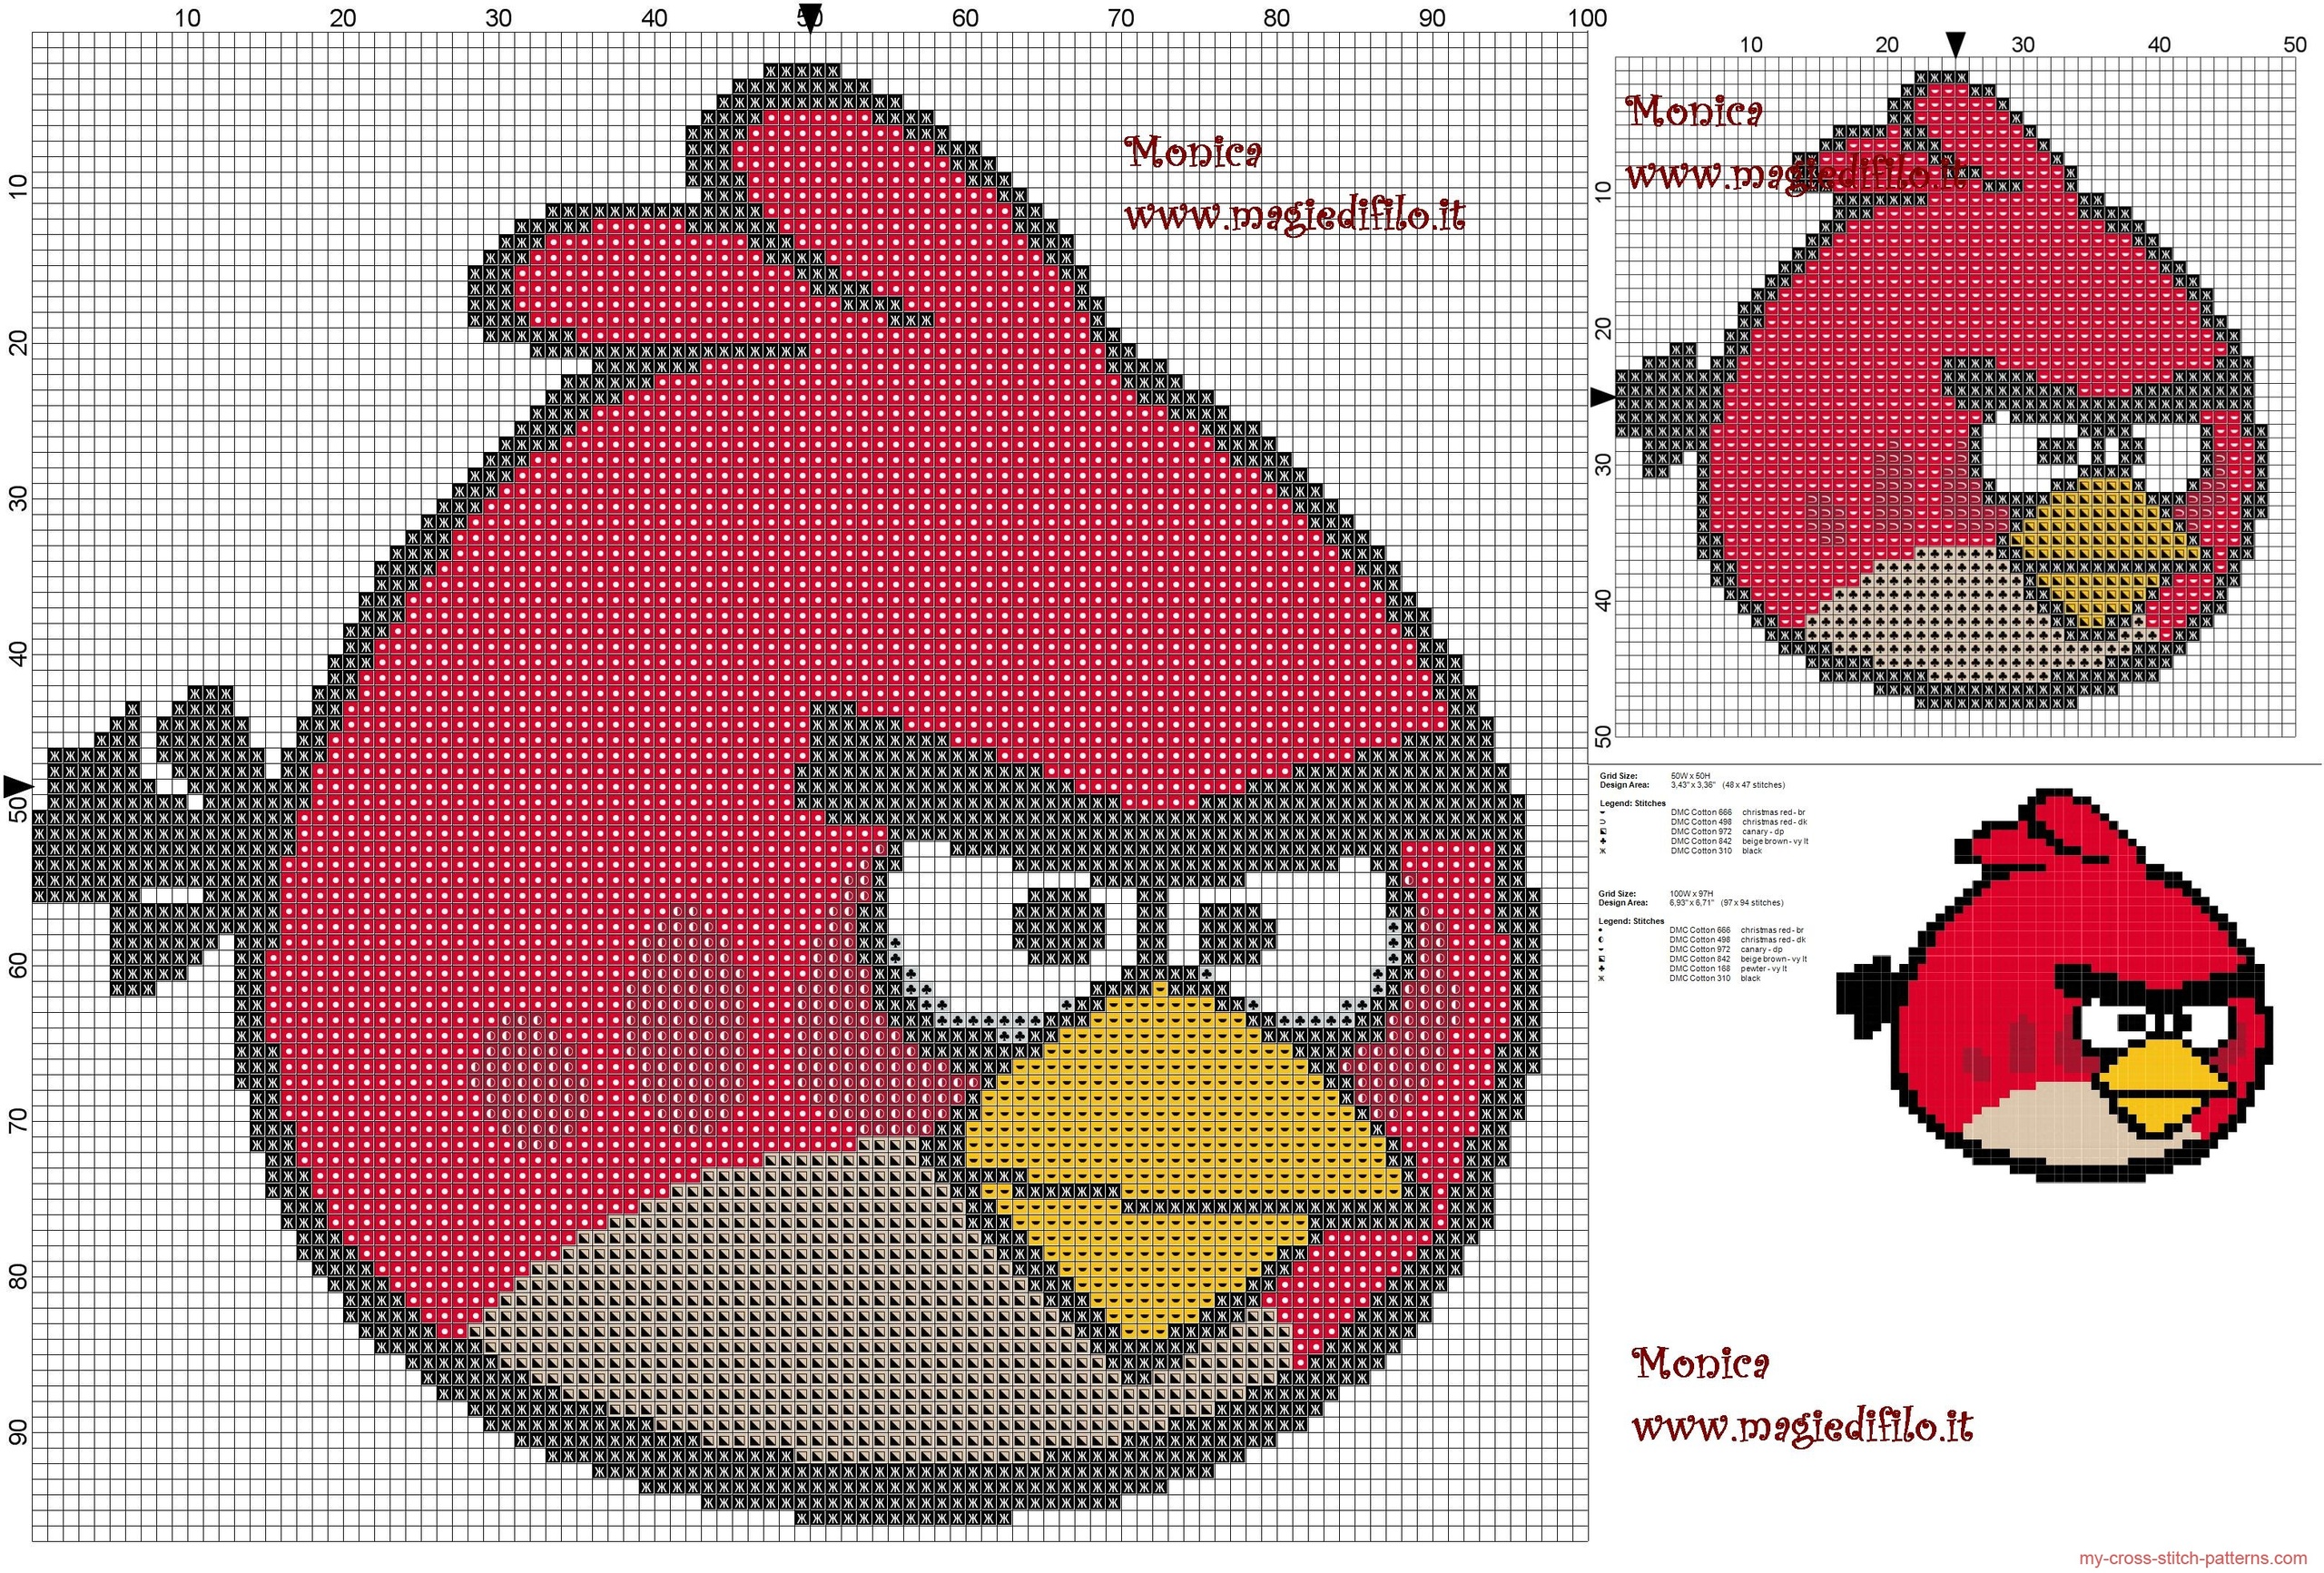 schema_punto_croce_angry_birds_uccello_rosso_